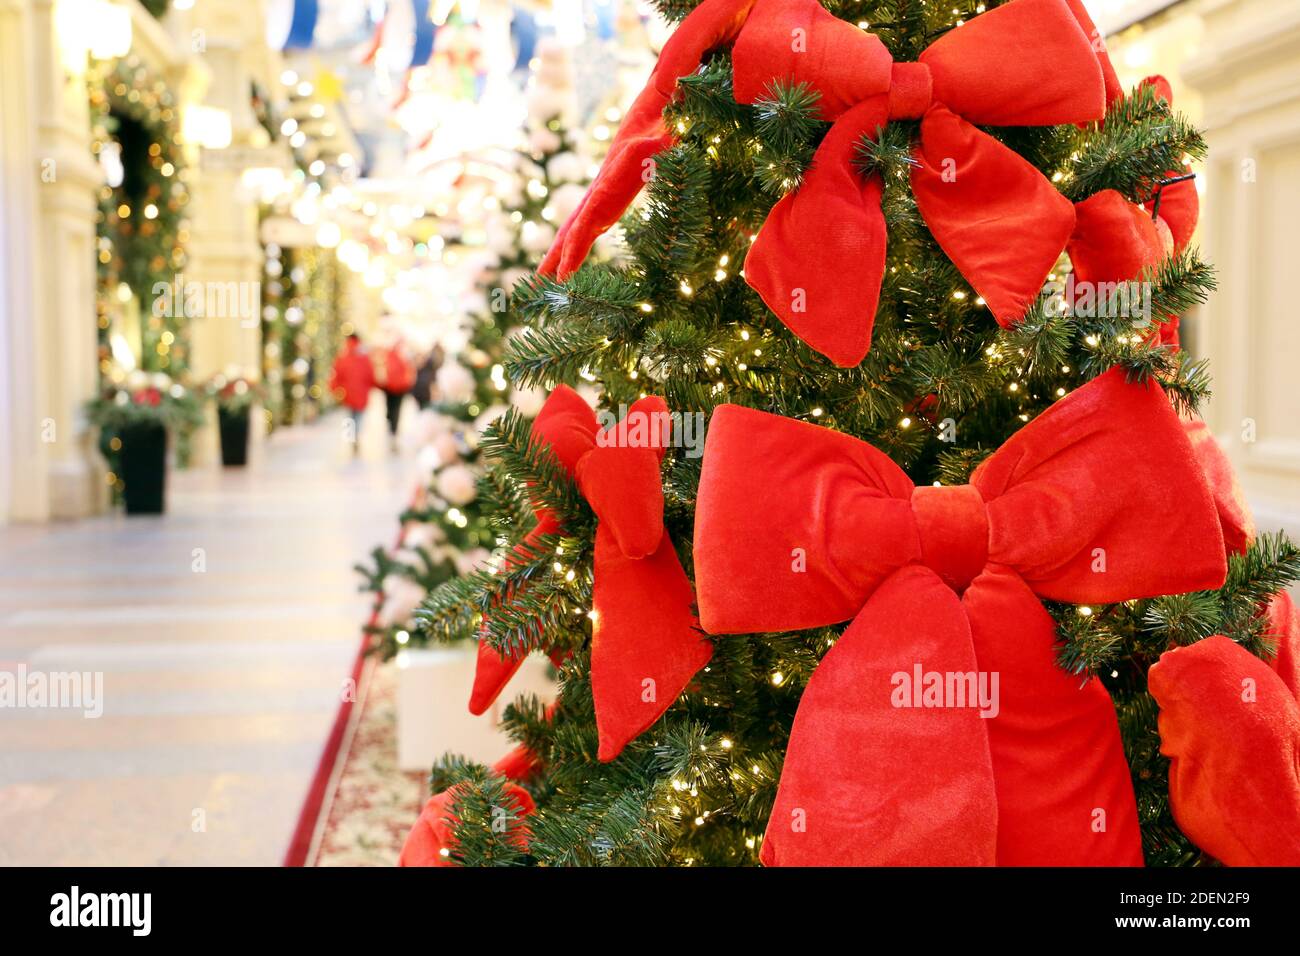 Christmas tree with red festive bows in a shopping mall on festive lights and walking people background. New Year decorations, winter holidays Stock Photo